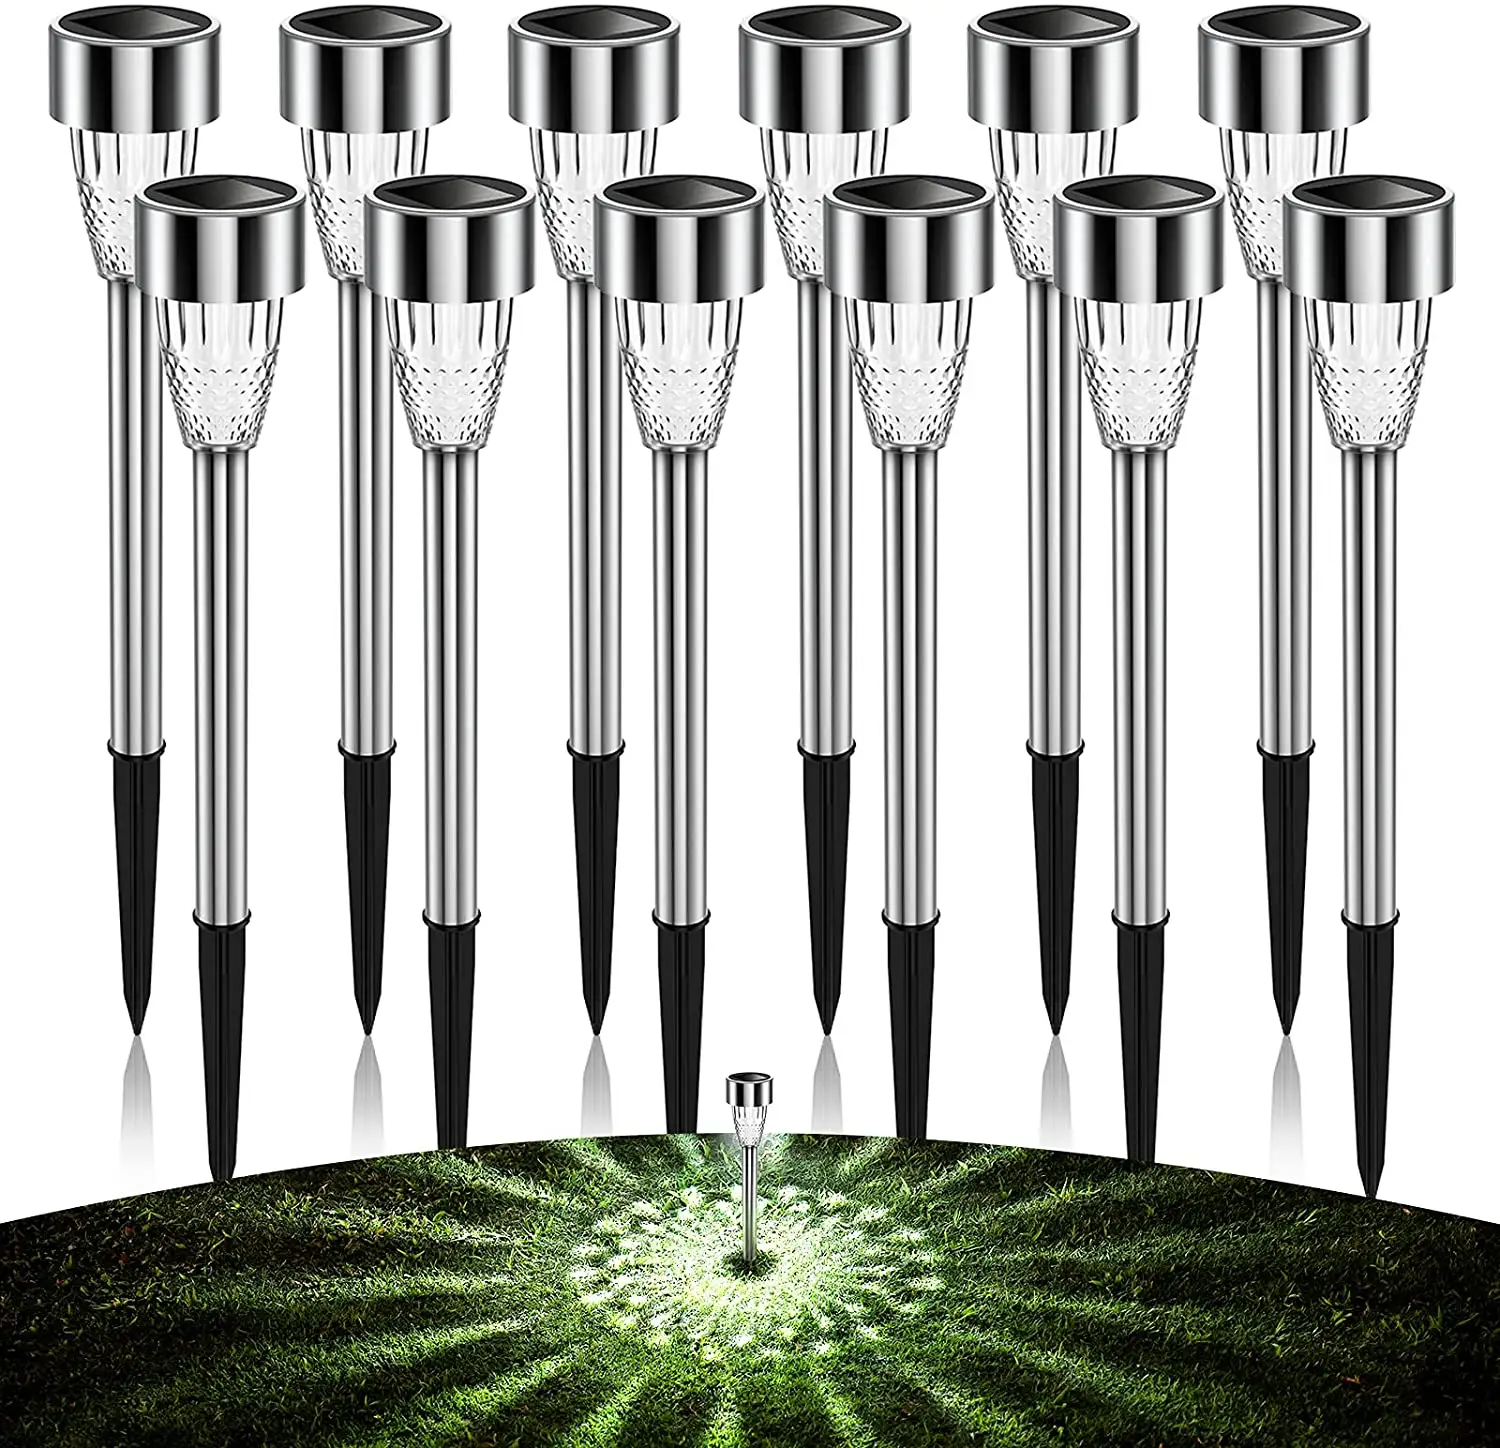 New 12 packs Solar LED Garden Lights Outdoor Stainless Steel Ultra Bright LED Landscape Lighting for Yard Patio Pathway